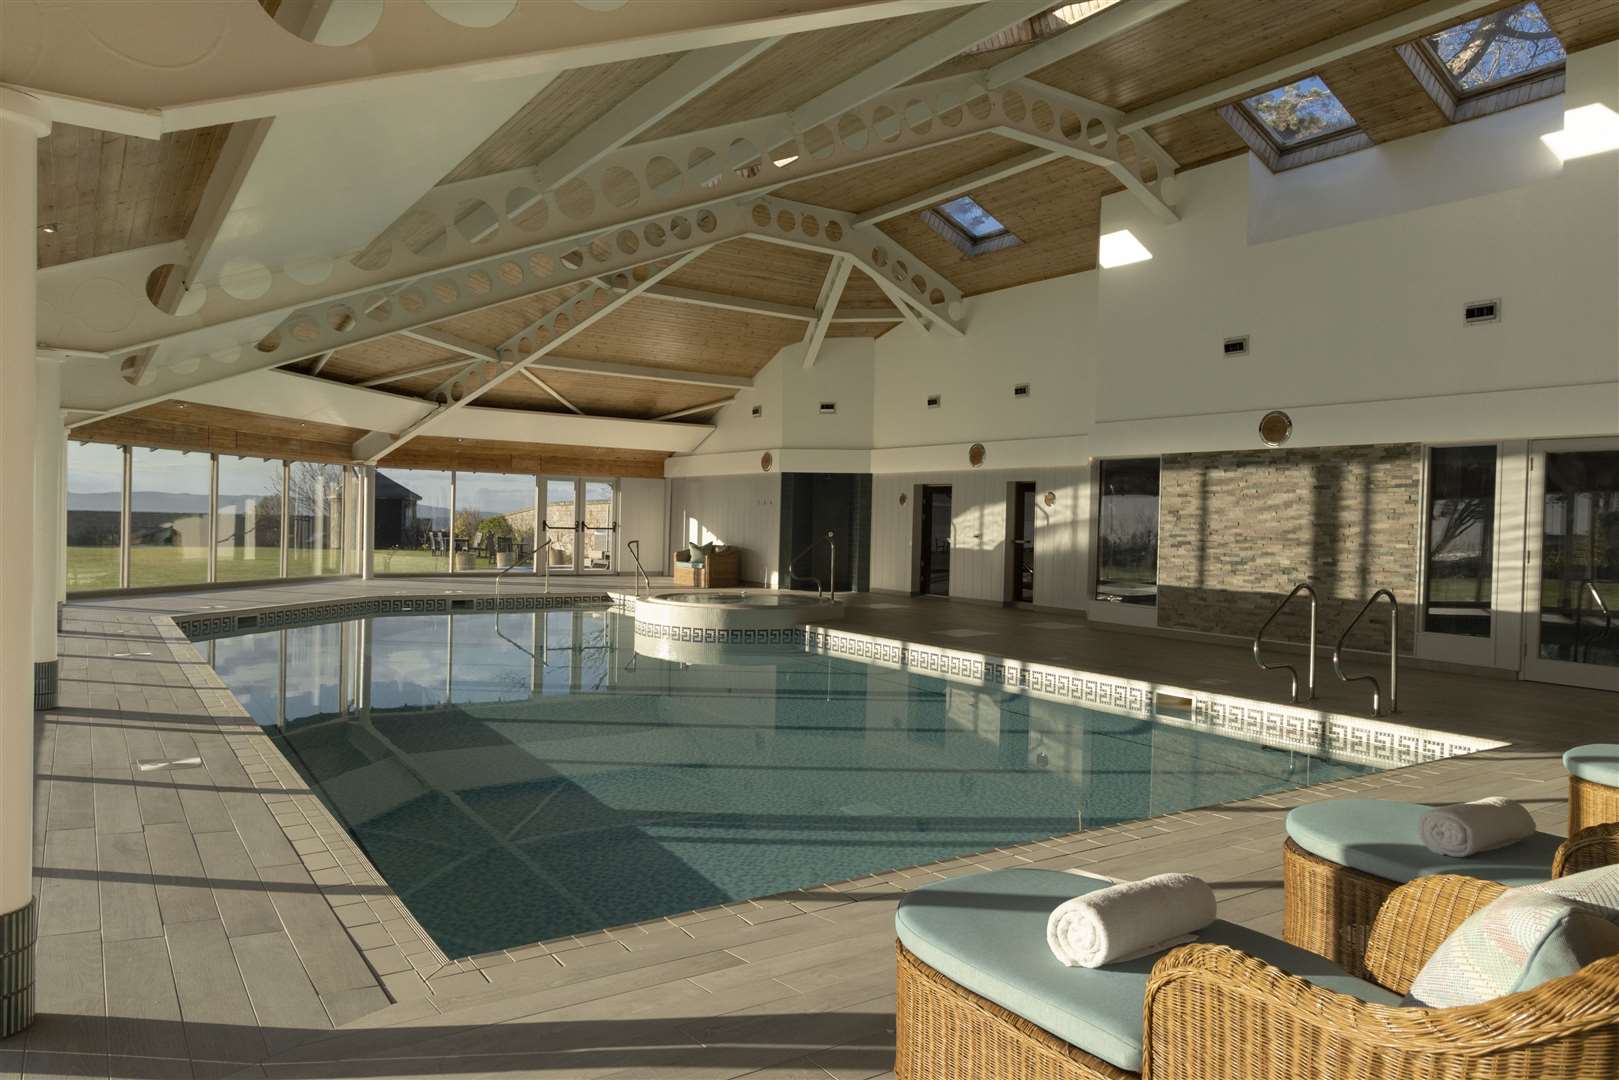 Milliard konstant Jeg bærer tøj Golf View Hotel and Spa in Nairn hotel and spa gets £850,000 makeover